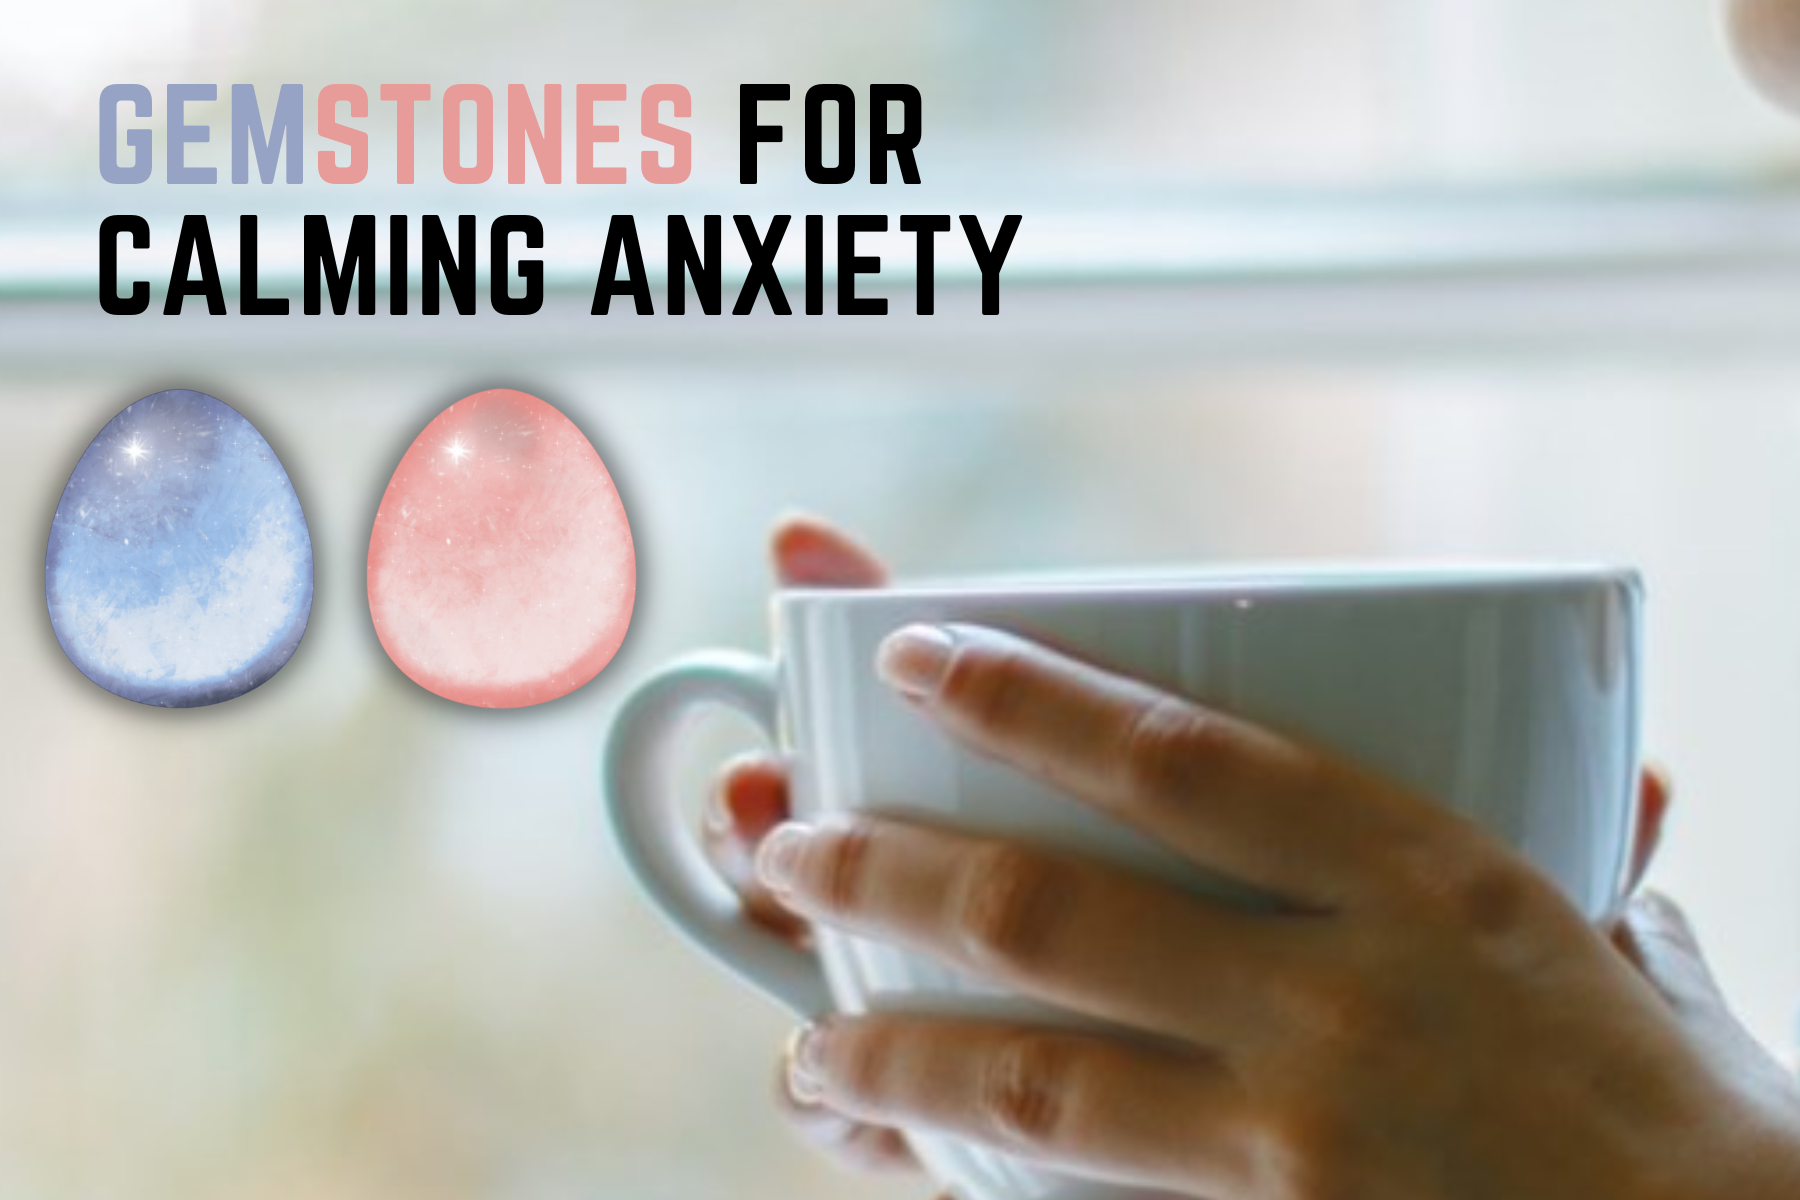 Use These Two Amazing Gemstones For Calming Anxiety